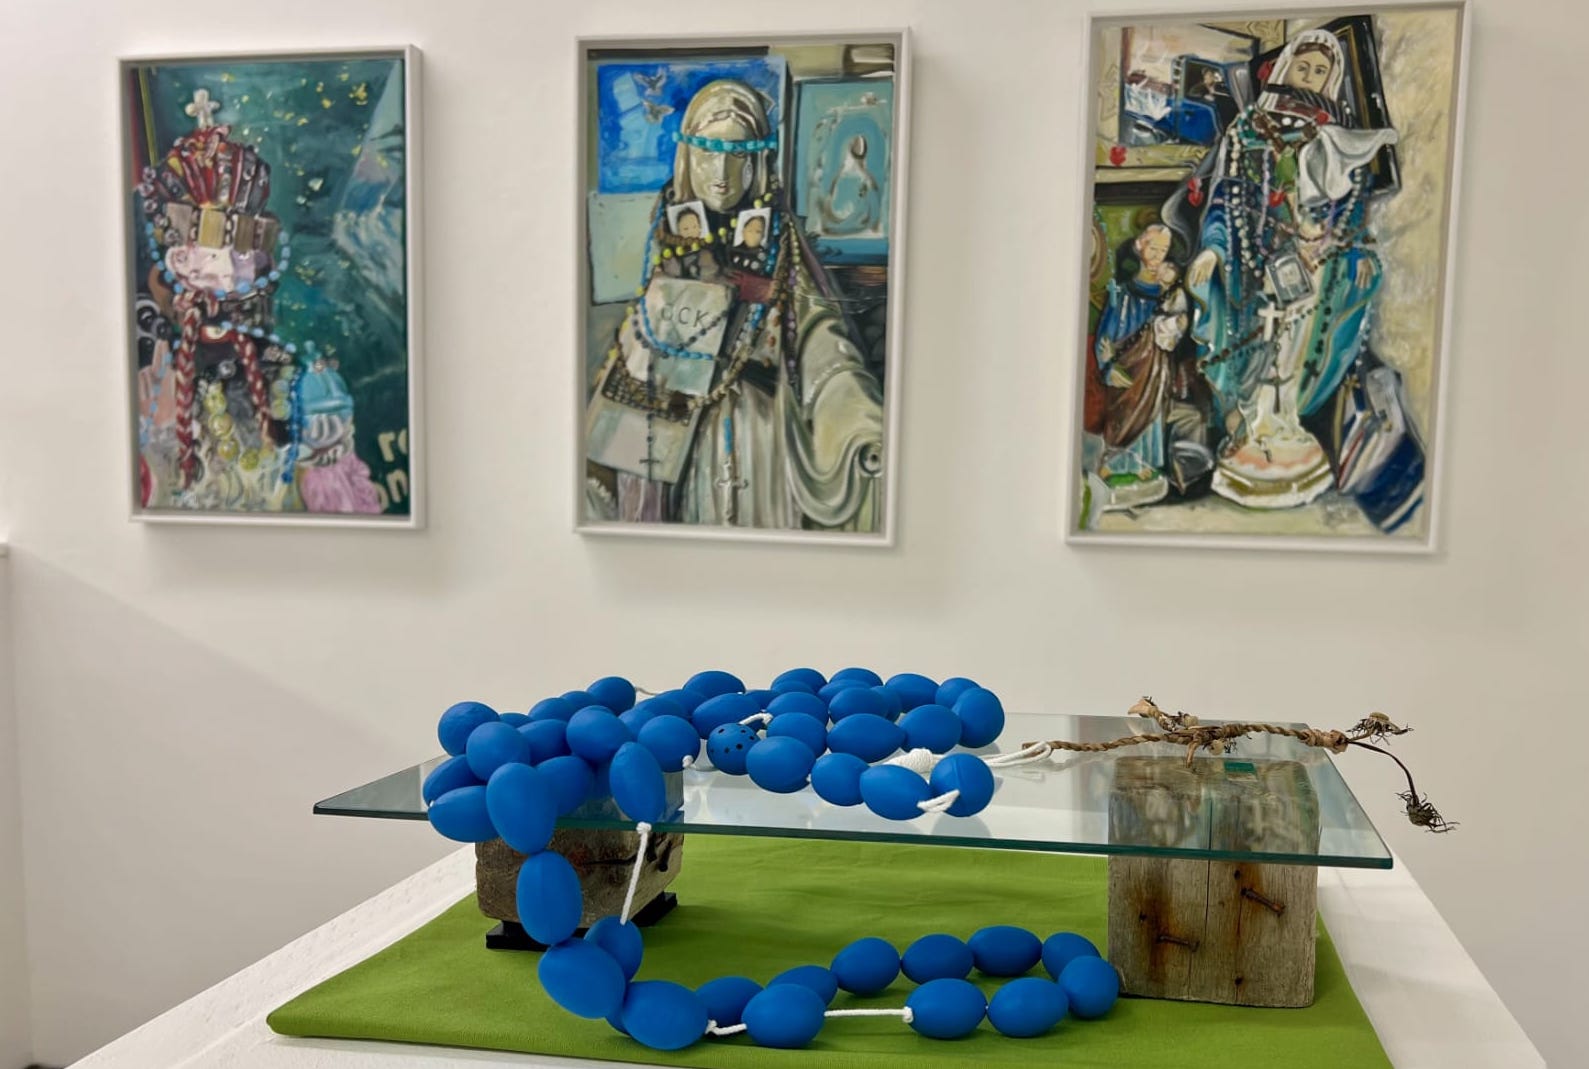 3 paintings on a gallery wall with a table in front with a string of large blue beads on a glass display plinth.